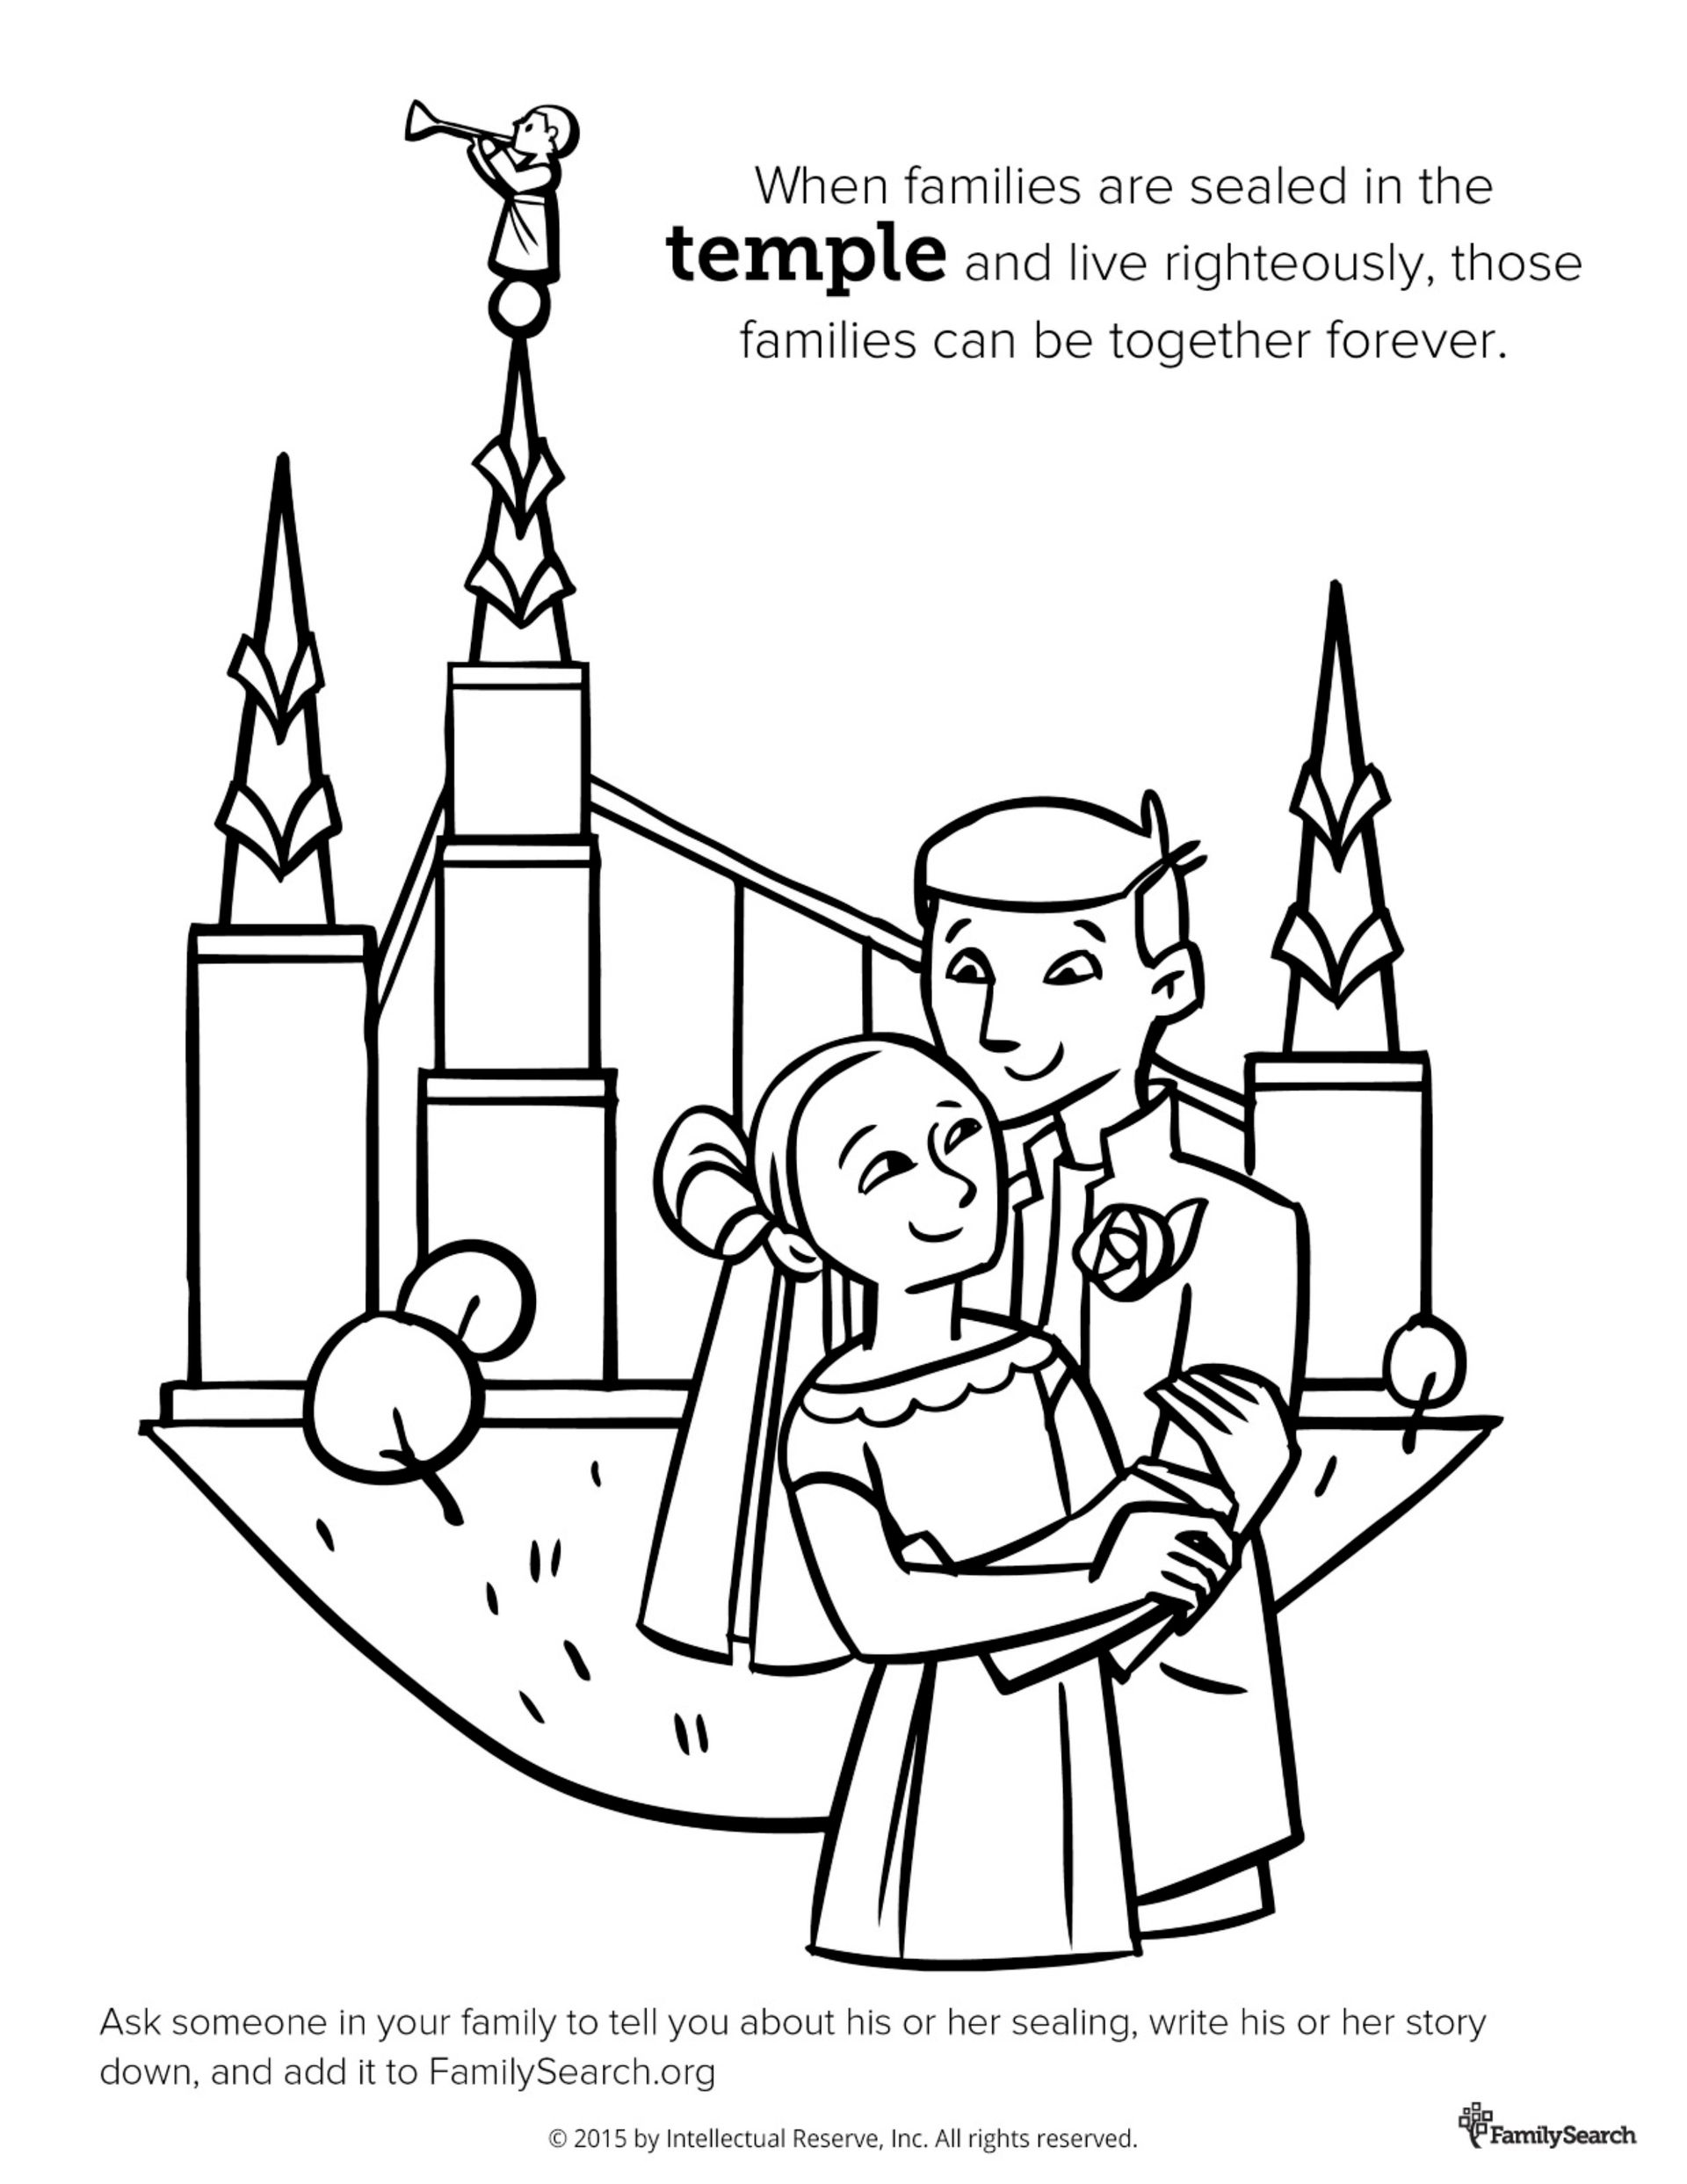 When families are sealed in the temple and live righteously, those families can be together forever. Ask someone in your family to tell you about his or her sealing, write his or her story down, and add it to FamilySearch.org.